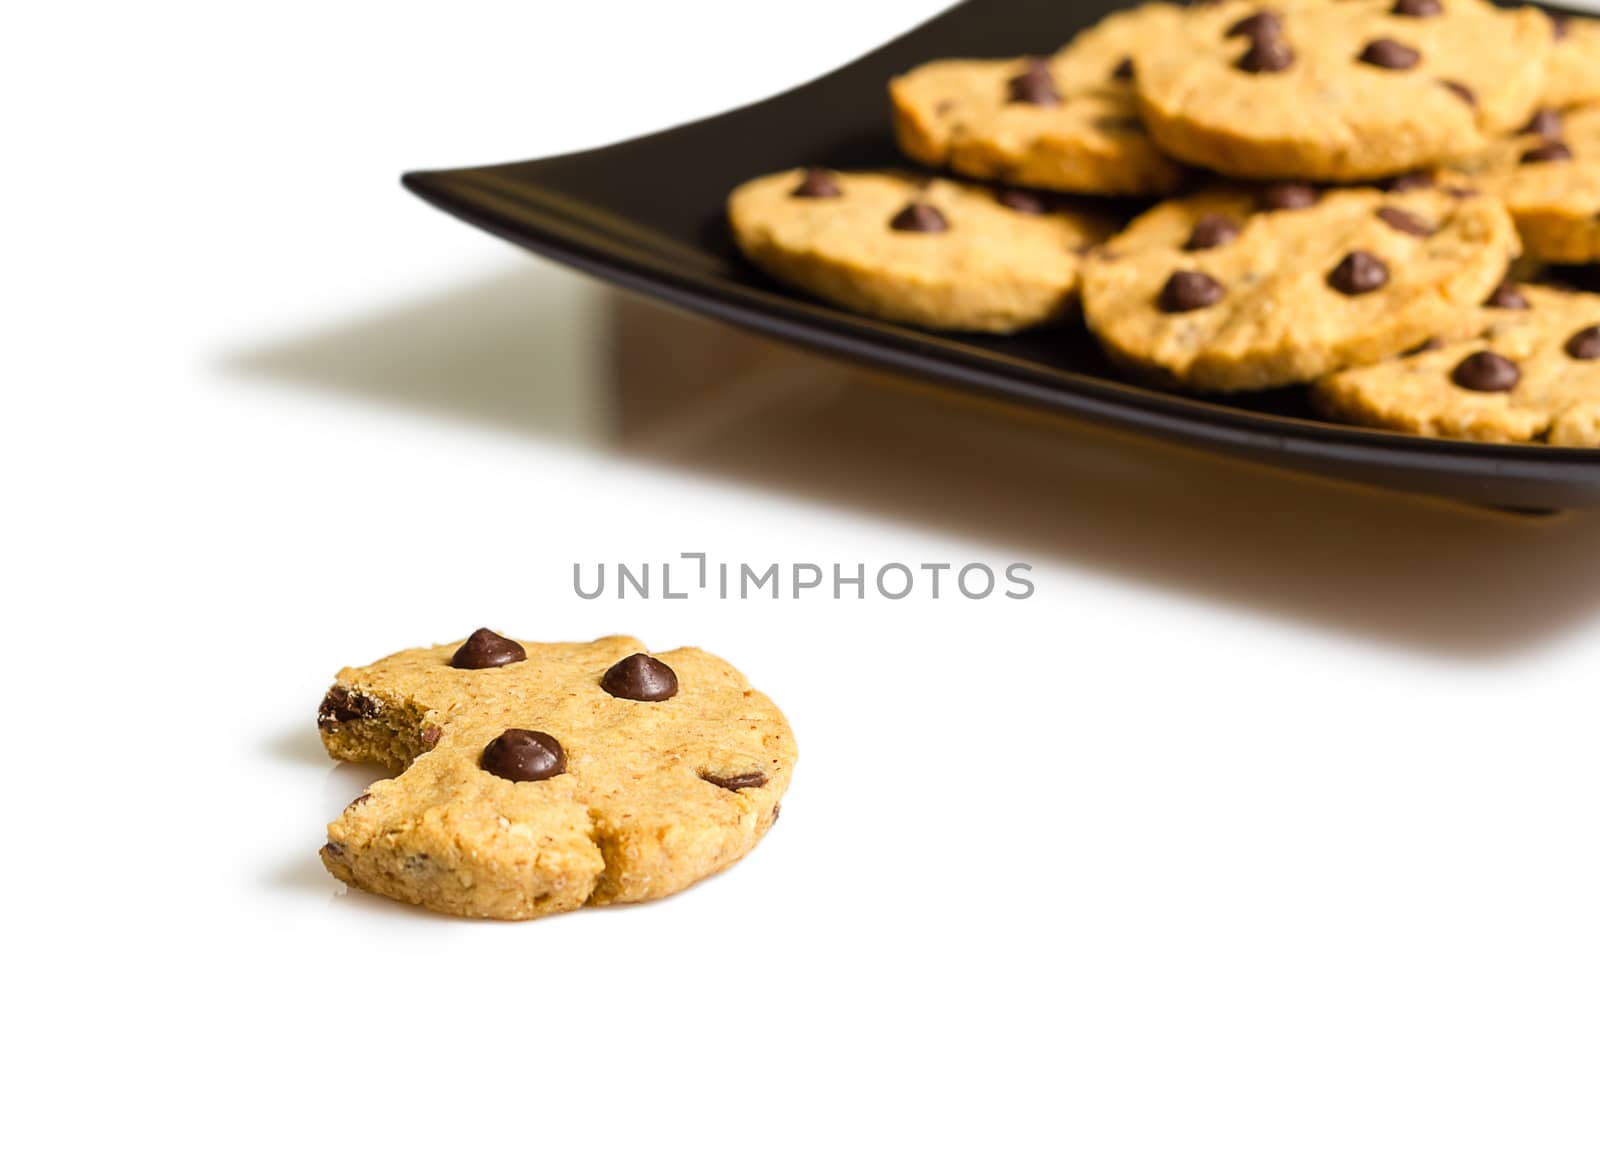 Chocolate chip cookie with a bite and pile of cookies in a plate by doble.d